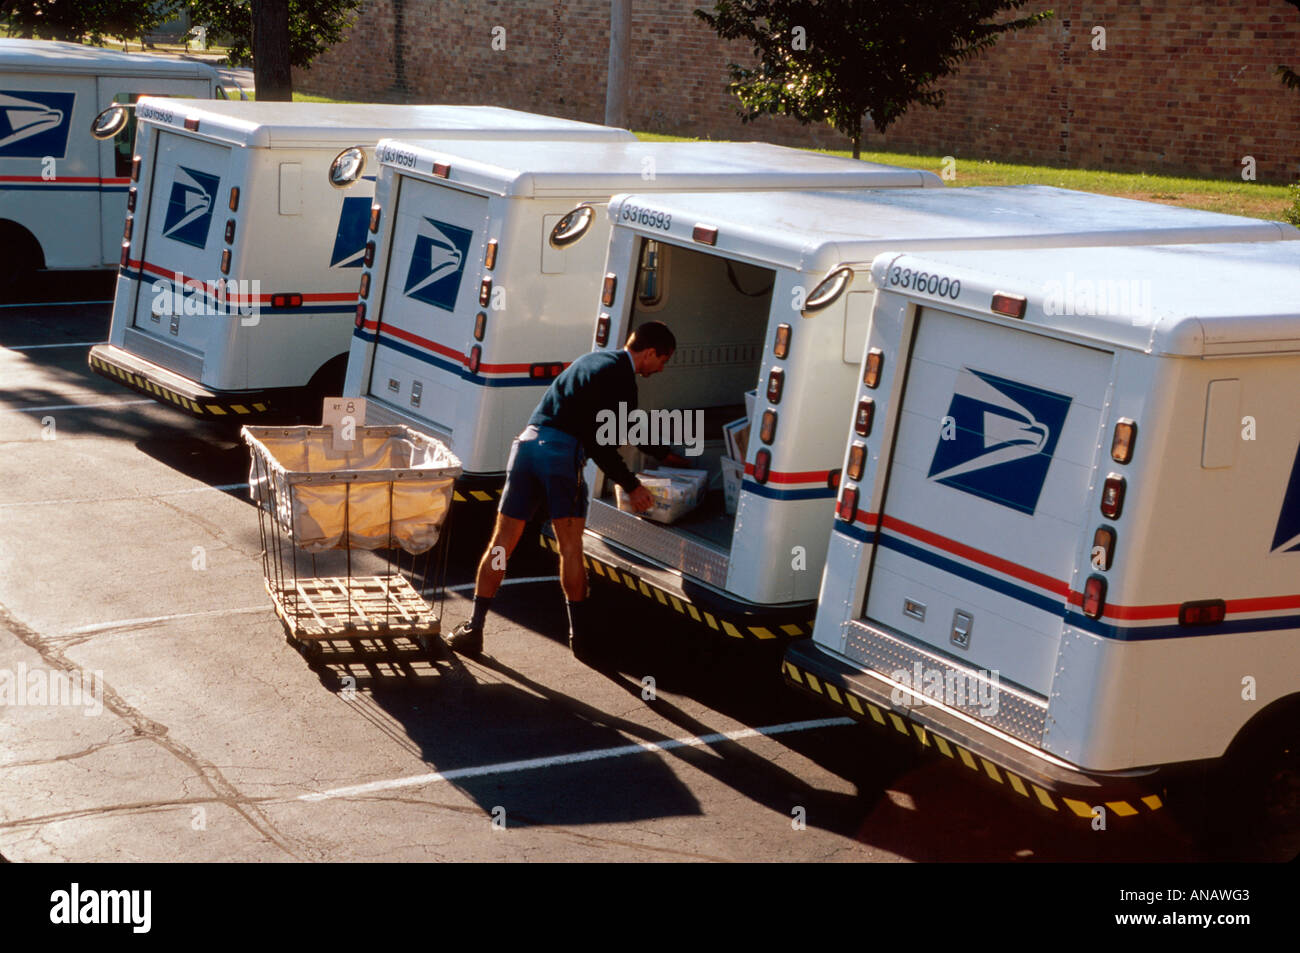 Ohio Oberlin,US Post Office,mail carrier,delivery,van,mailman,truck,lorry,letters,packages,working,work,employee employees worker workers staff,parkin Stock Photo